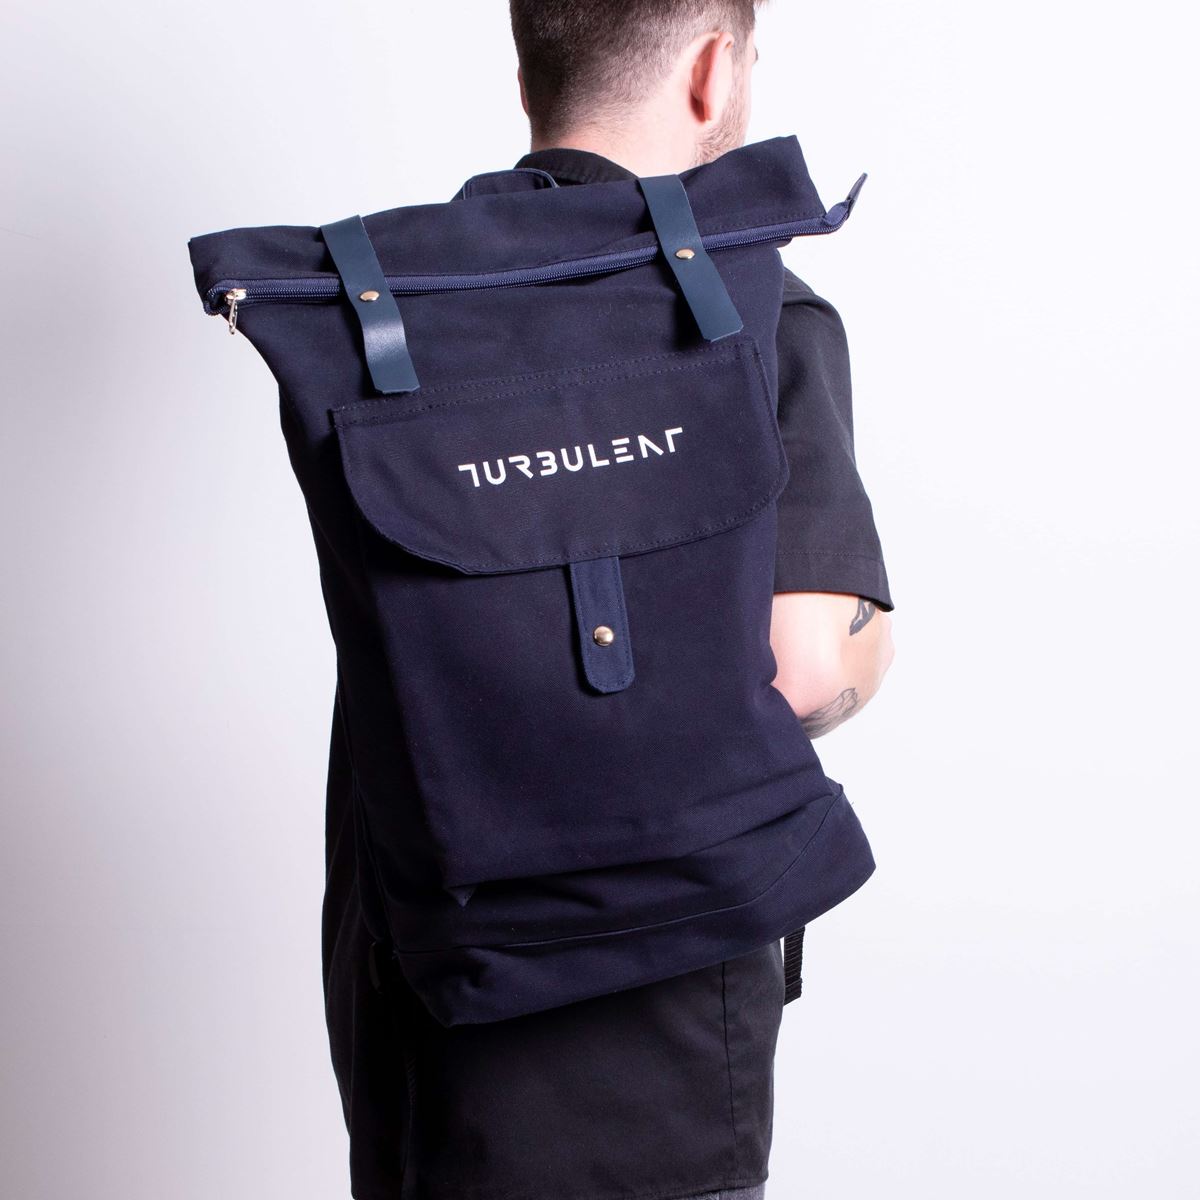 Fabric backpack - Everyday model